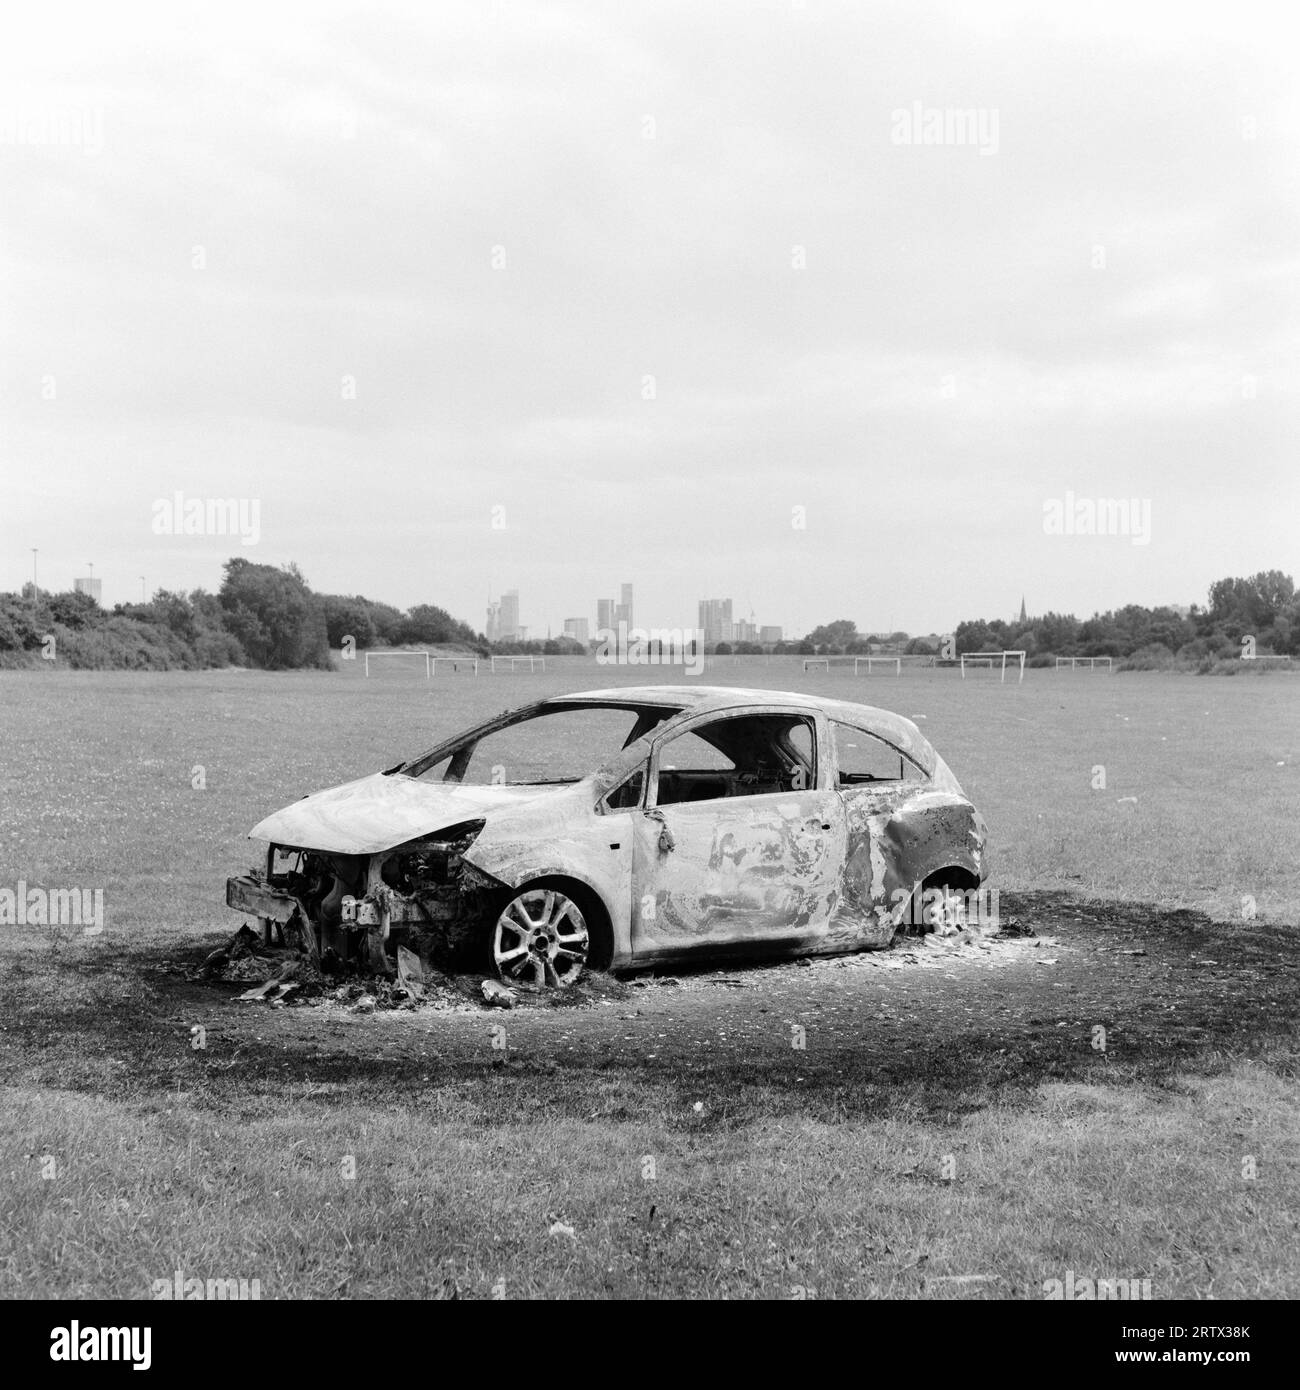 Burned out car, Kersal playing fields, Salford, UK. Skyline of Manchester city in the background. Car crime, theft, antisocial behaviour. July 2023 Stock Photo